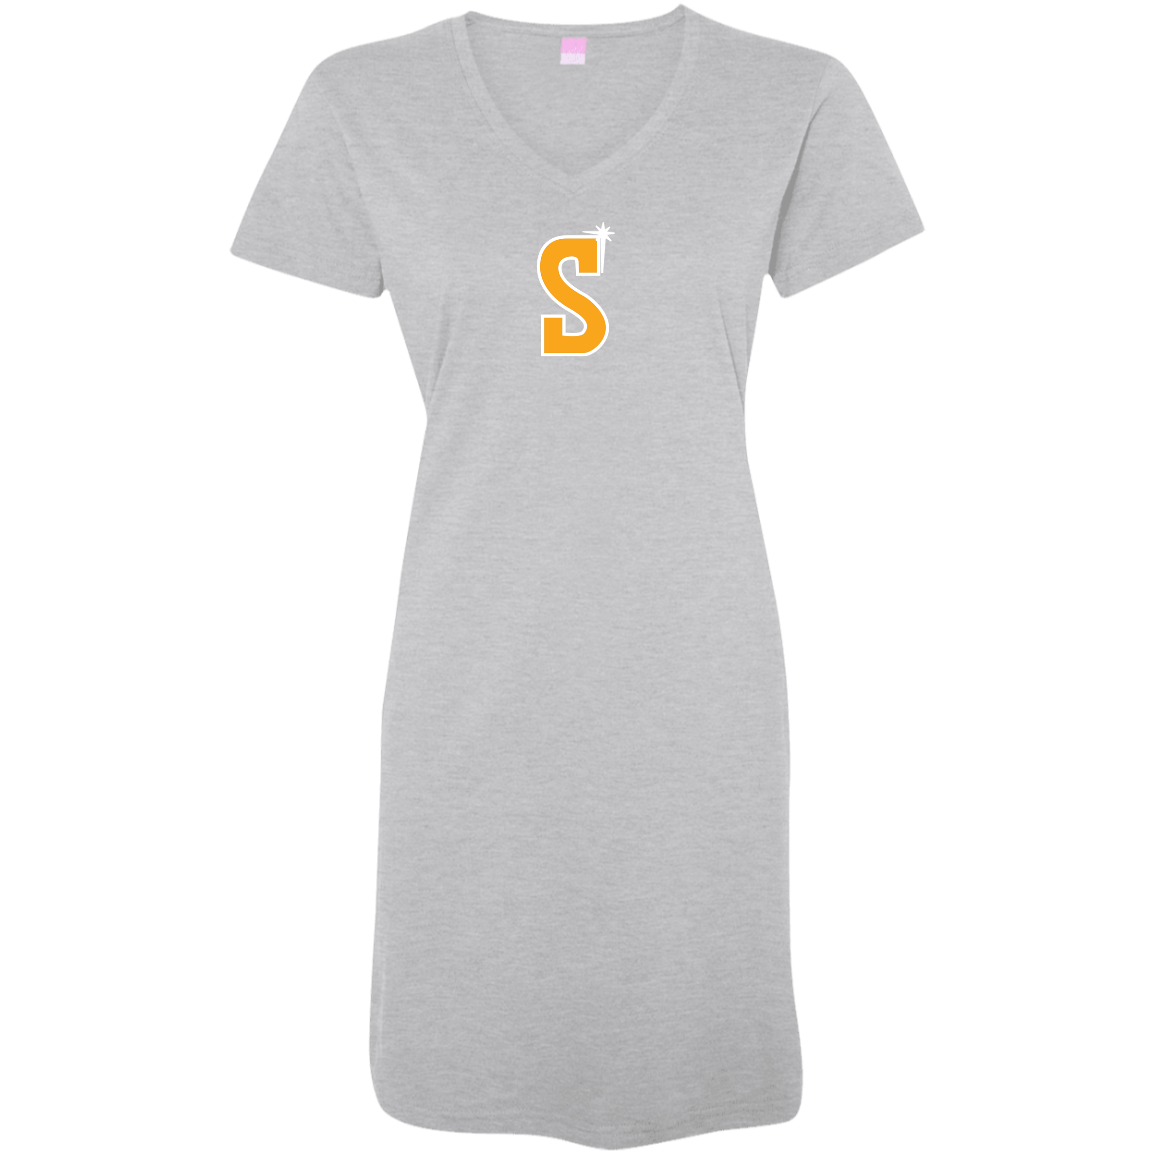 "S On My Chest" 3522 Ladies' V-Neck Fine Jersey Cover-Up